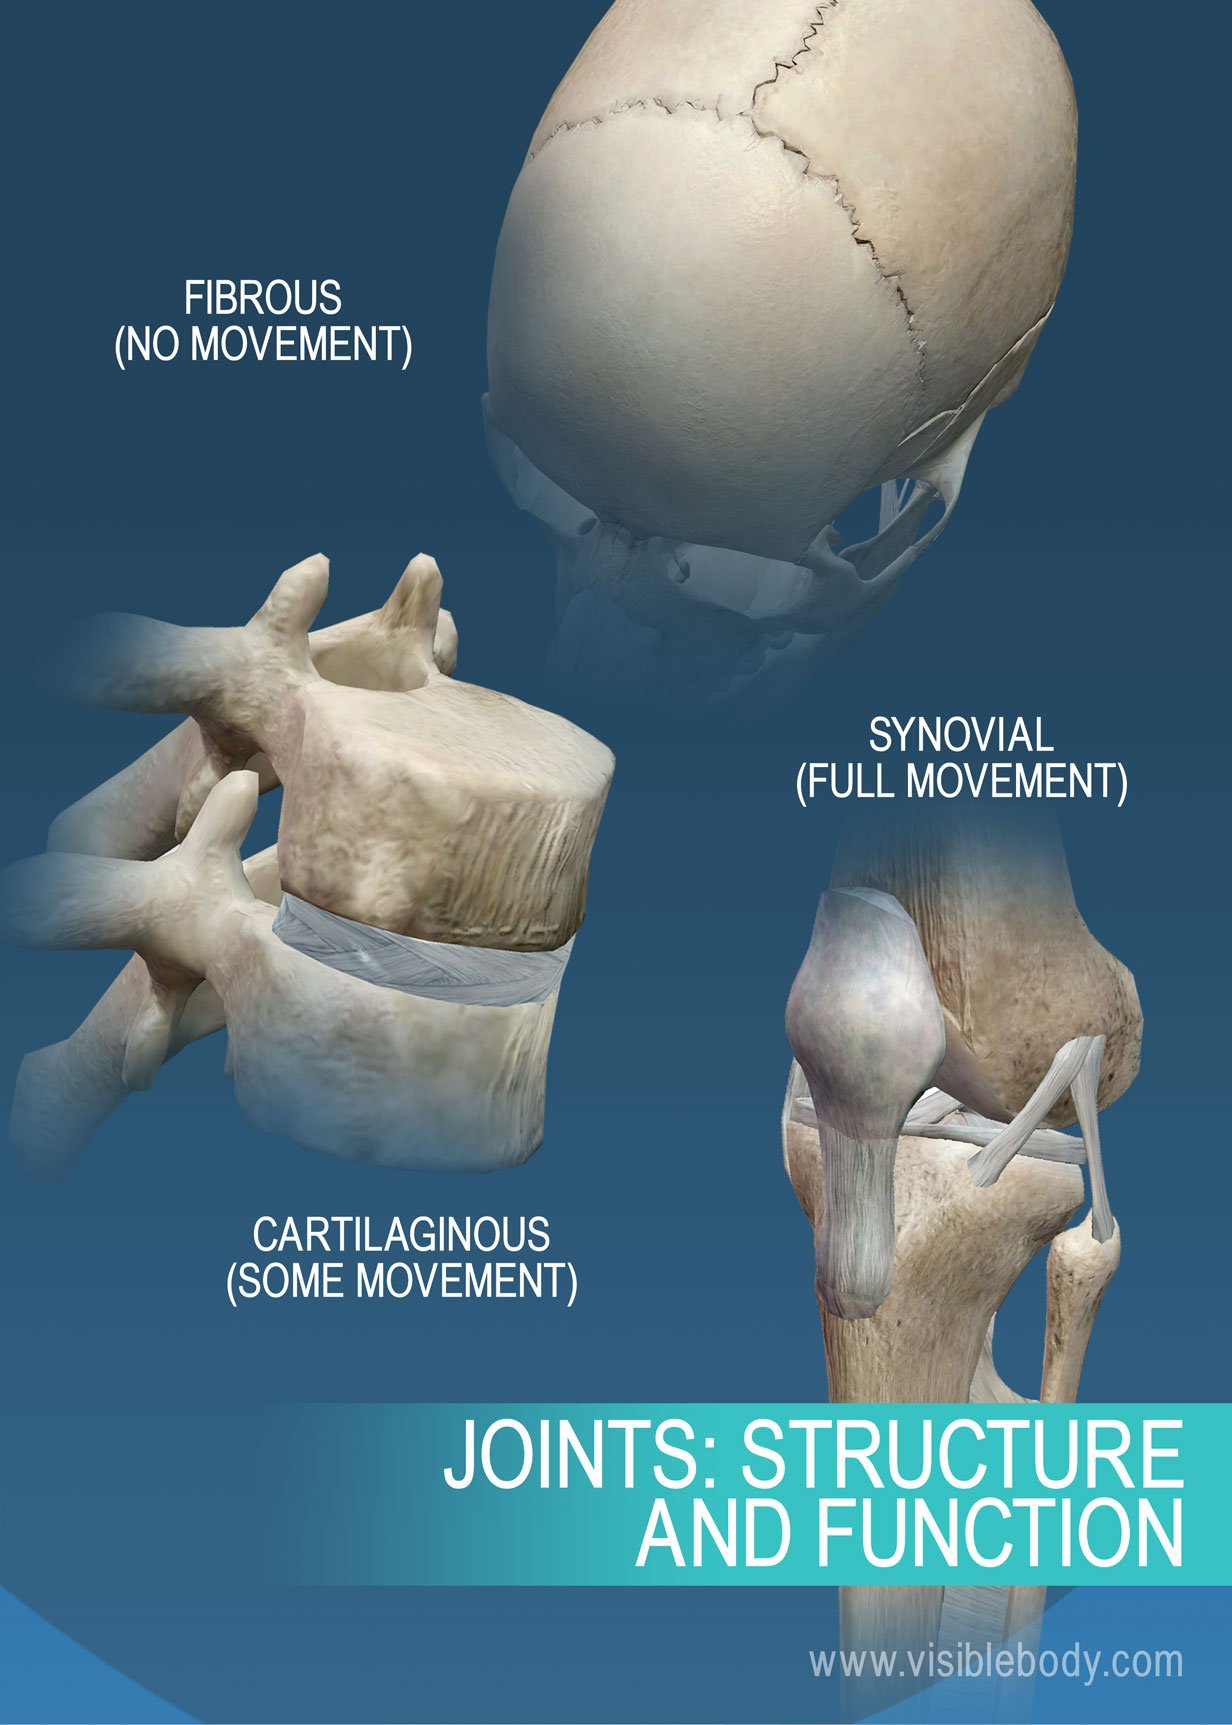 Summary of different joints, suture, knee, vertebral